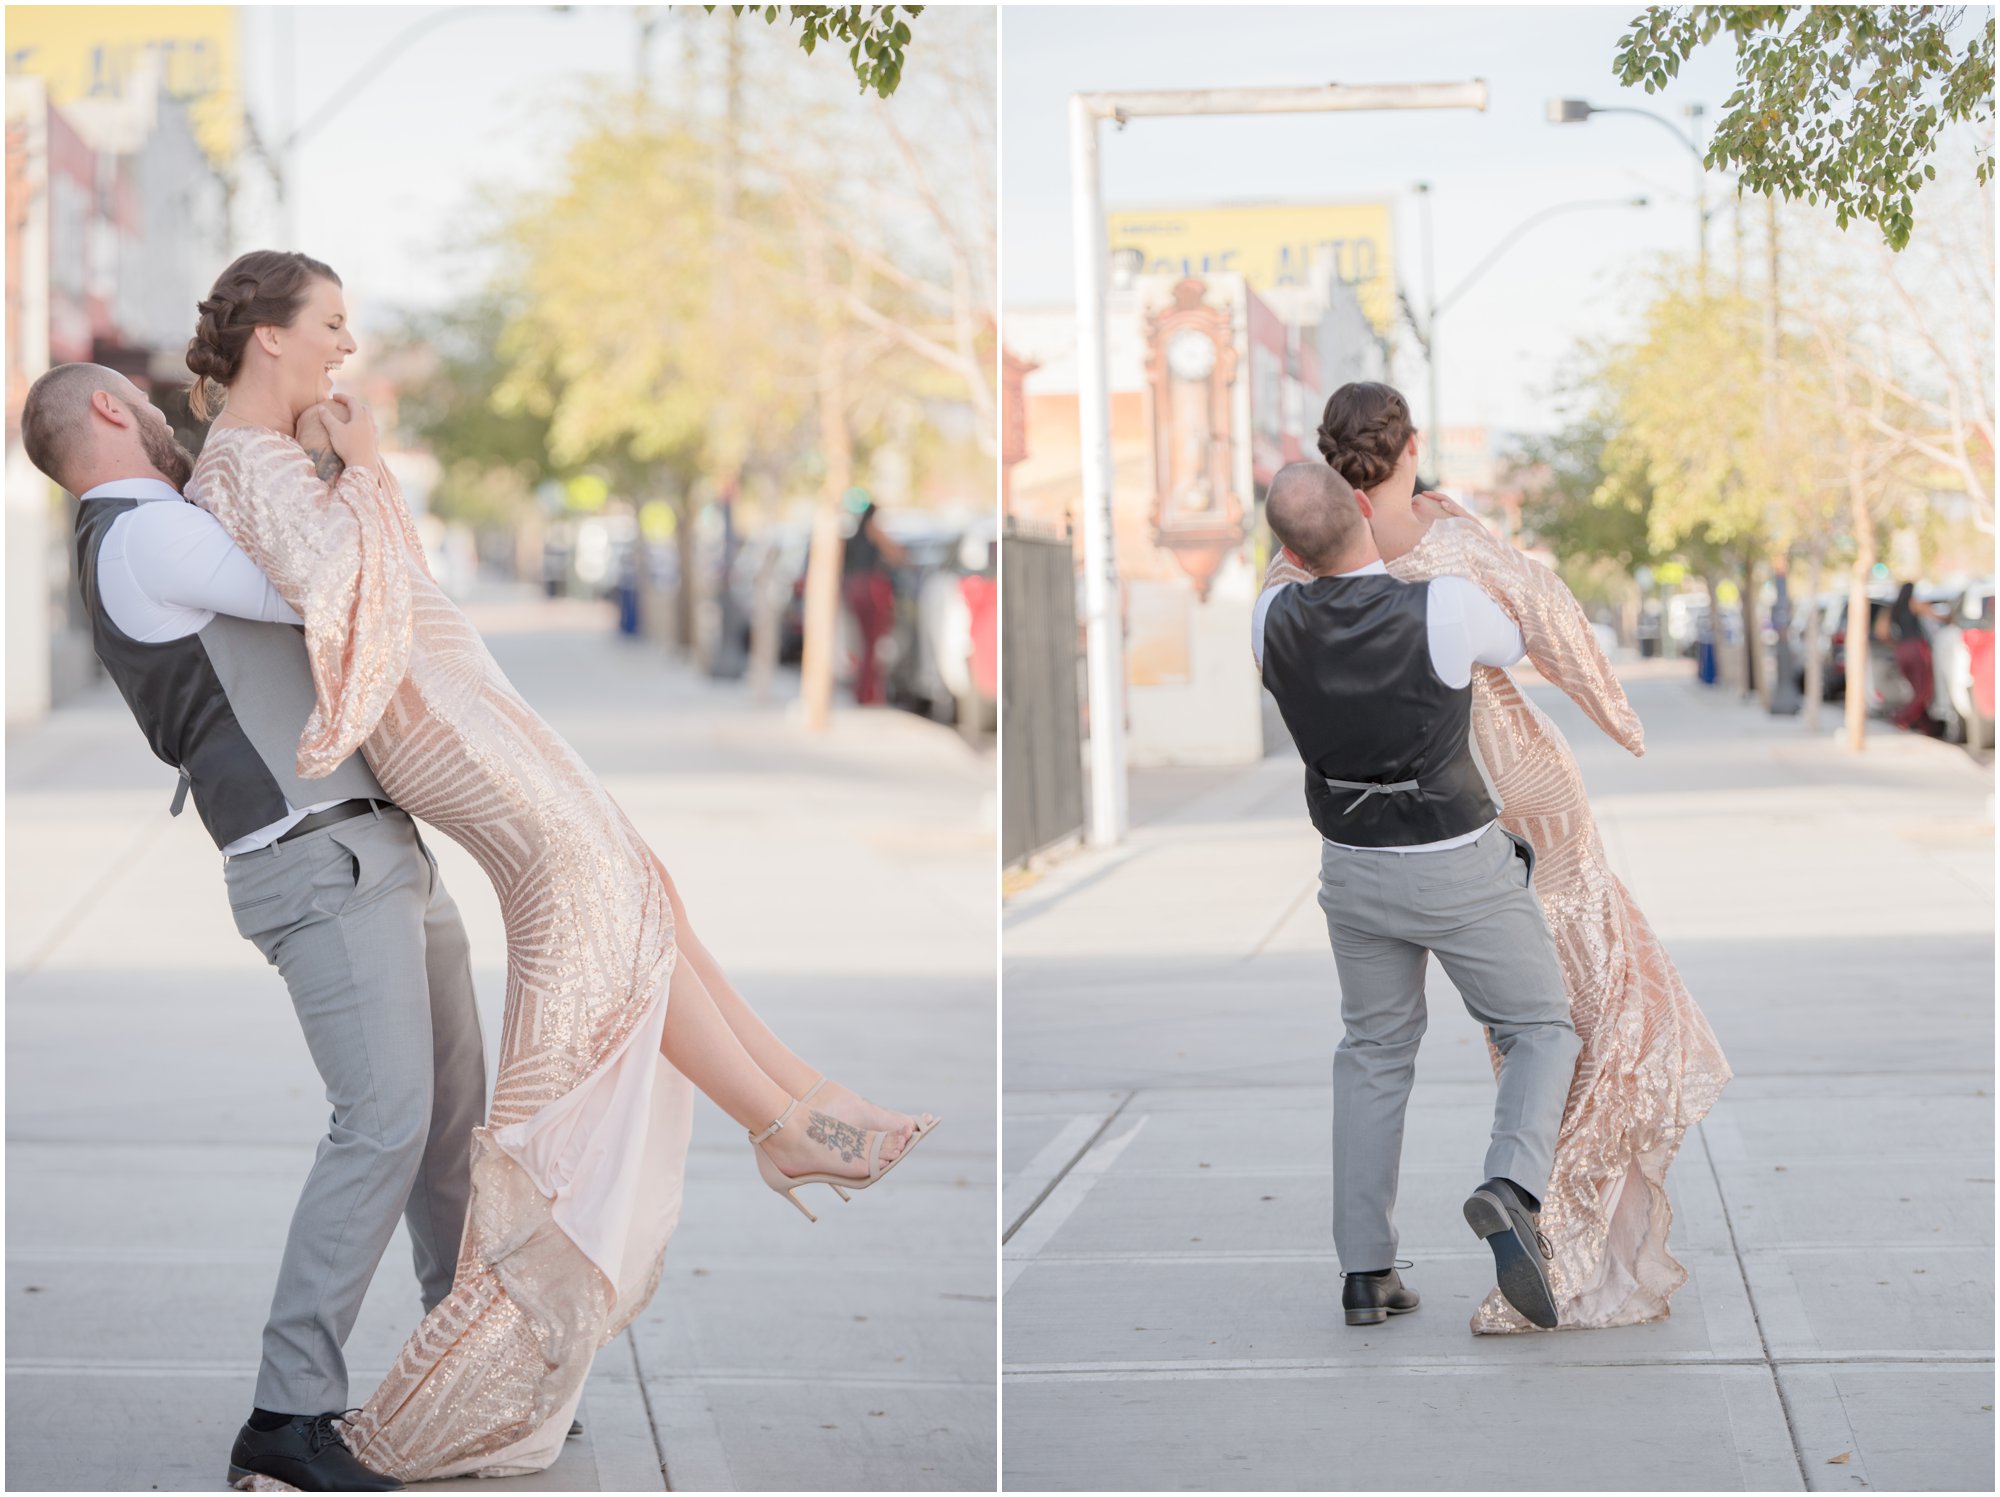 Couple Dancing in the Street